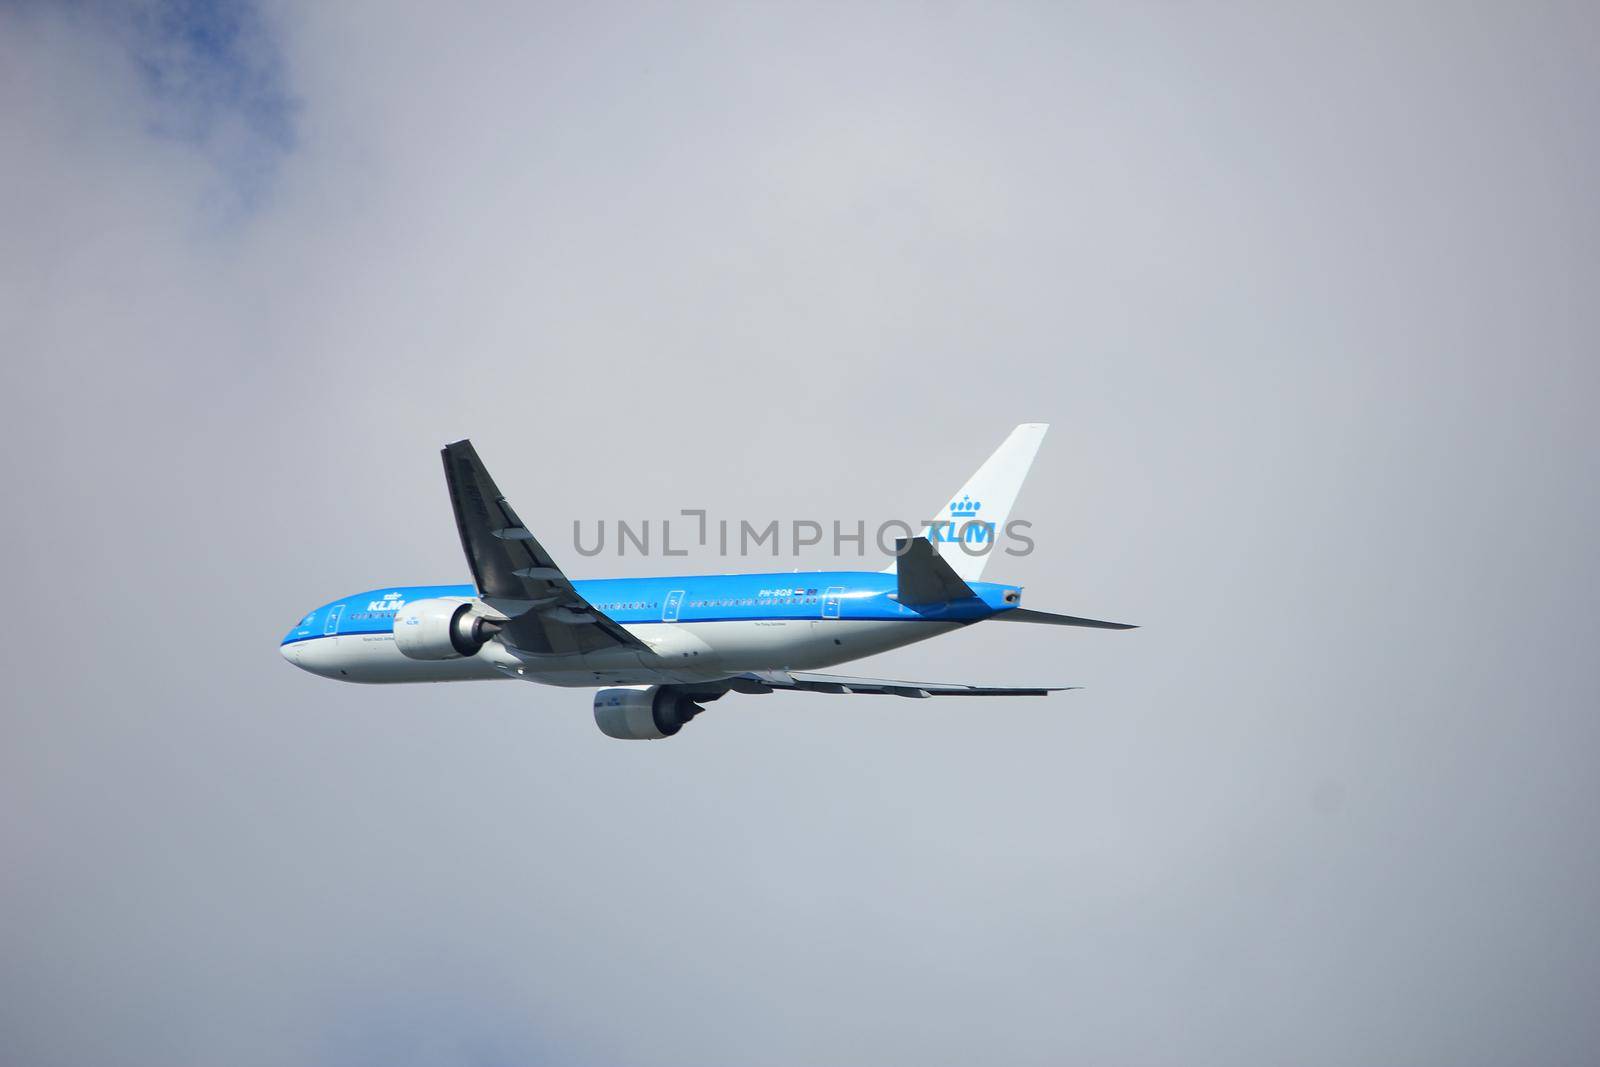 Amsterdam the Netherlands - September 23rd 2017: PH-BQB KLM Royal Dutch Airlines Boeing 777-200 takeoff from Kaagbaan runway, Amsterdam Airport Schiphol